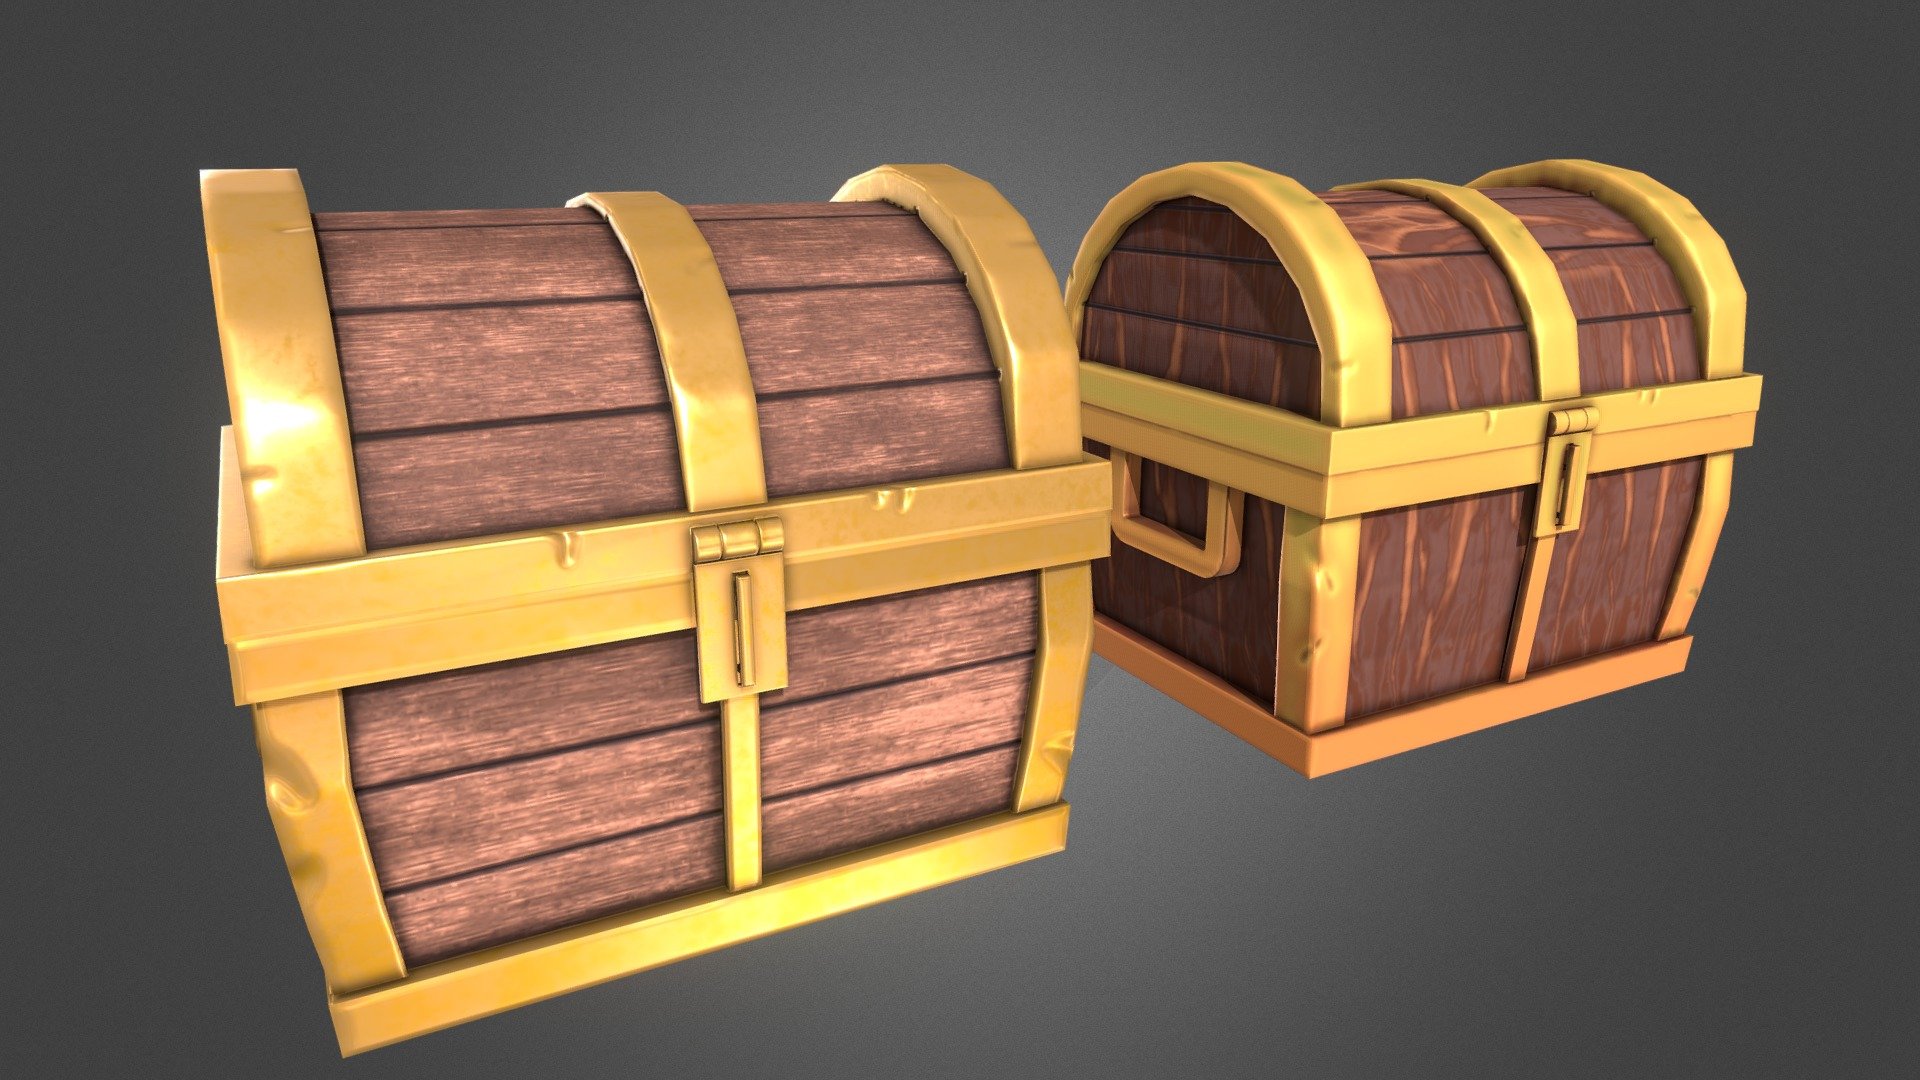 These chests were modeled in blender, details were added in ZBrush and textures were created in Substance Painter. One is more realistic, other is more cartoonish 3d model